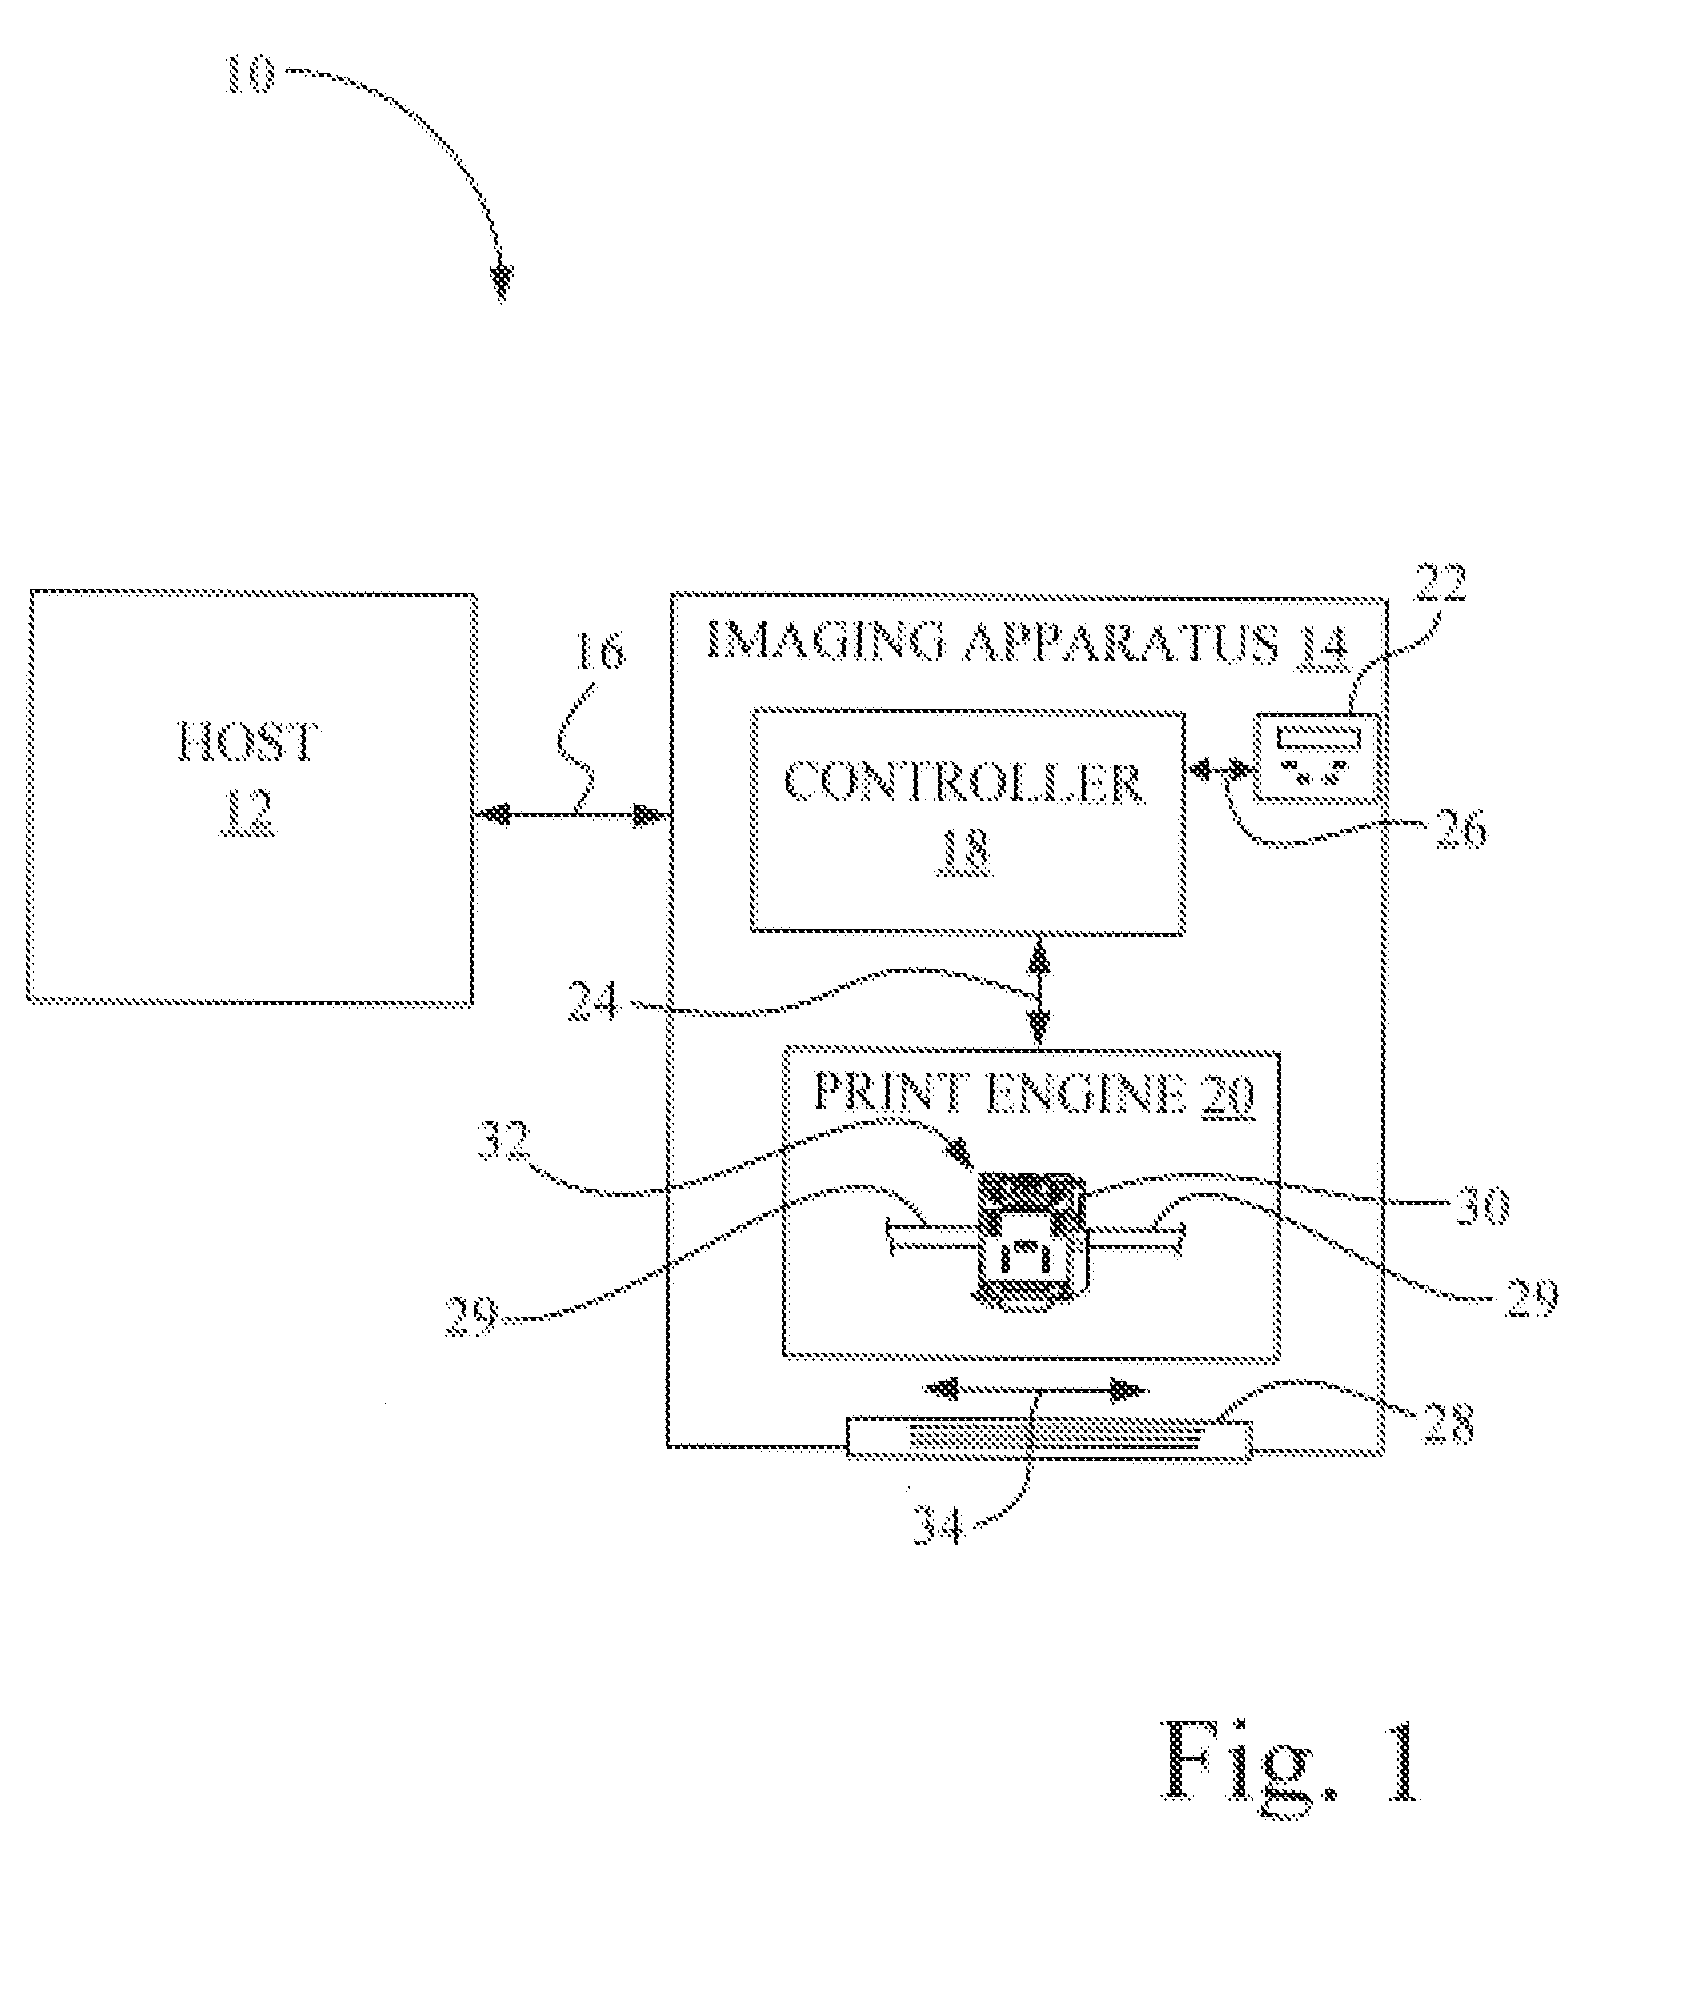 Printhead Carrier For An Imaging Apparatus